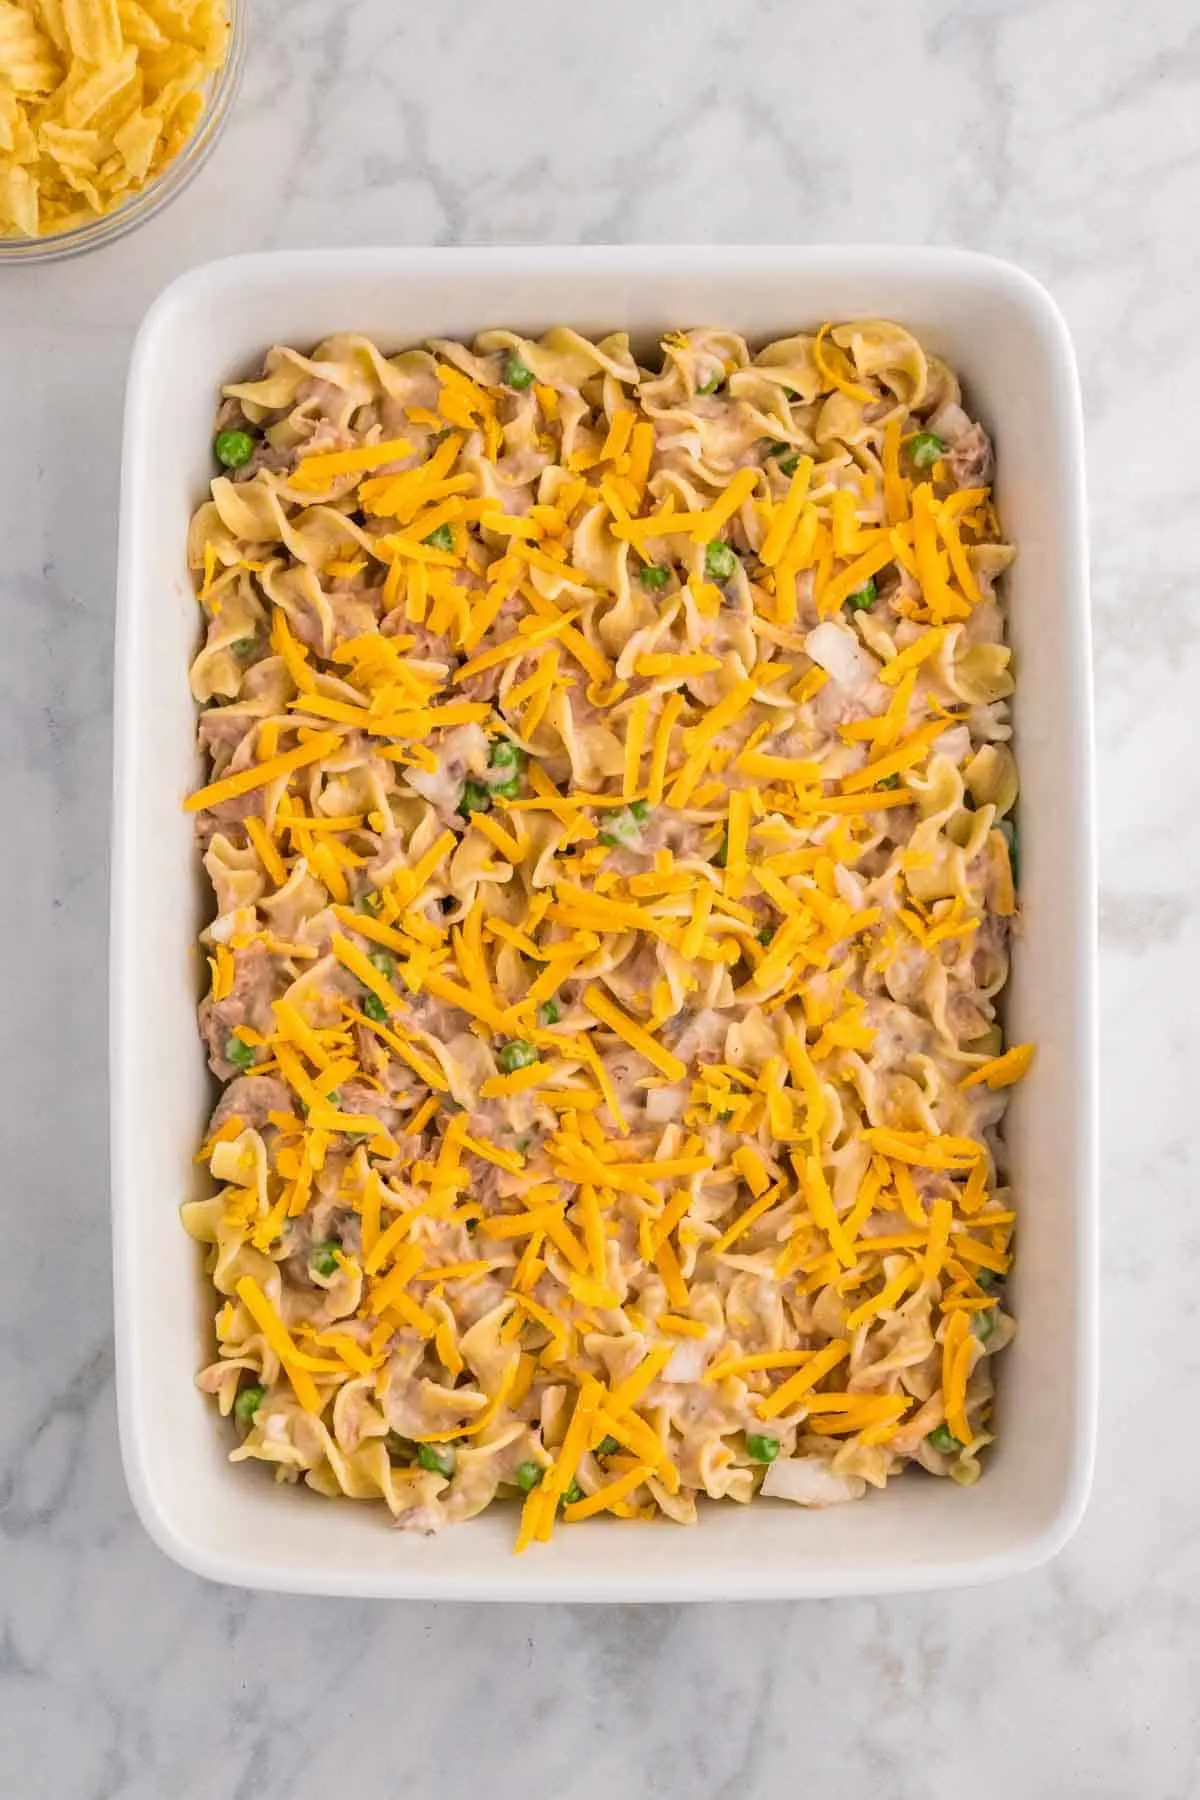 shredded cheese on top of tuna noodle casserole